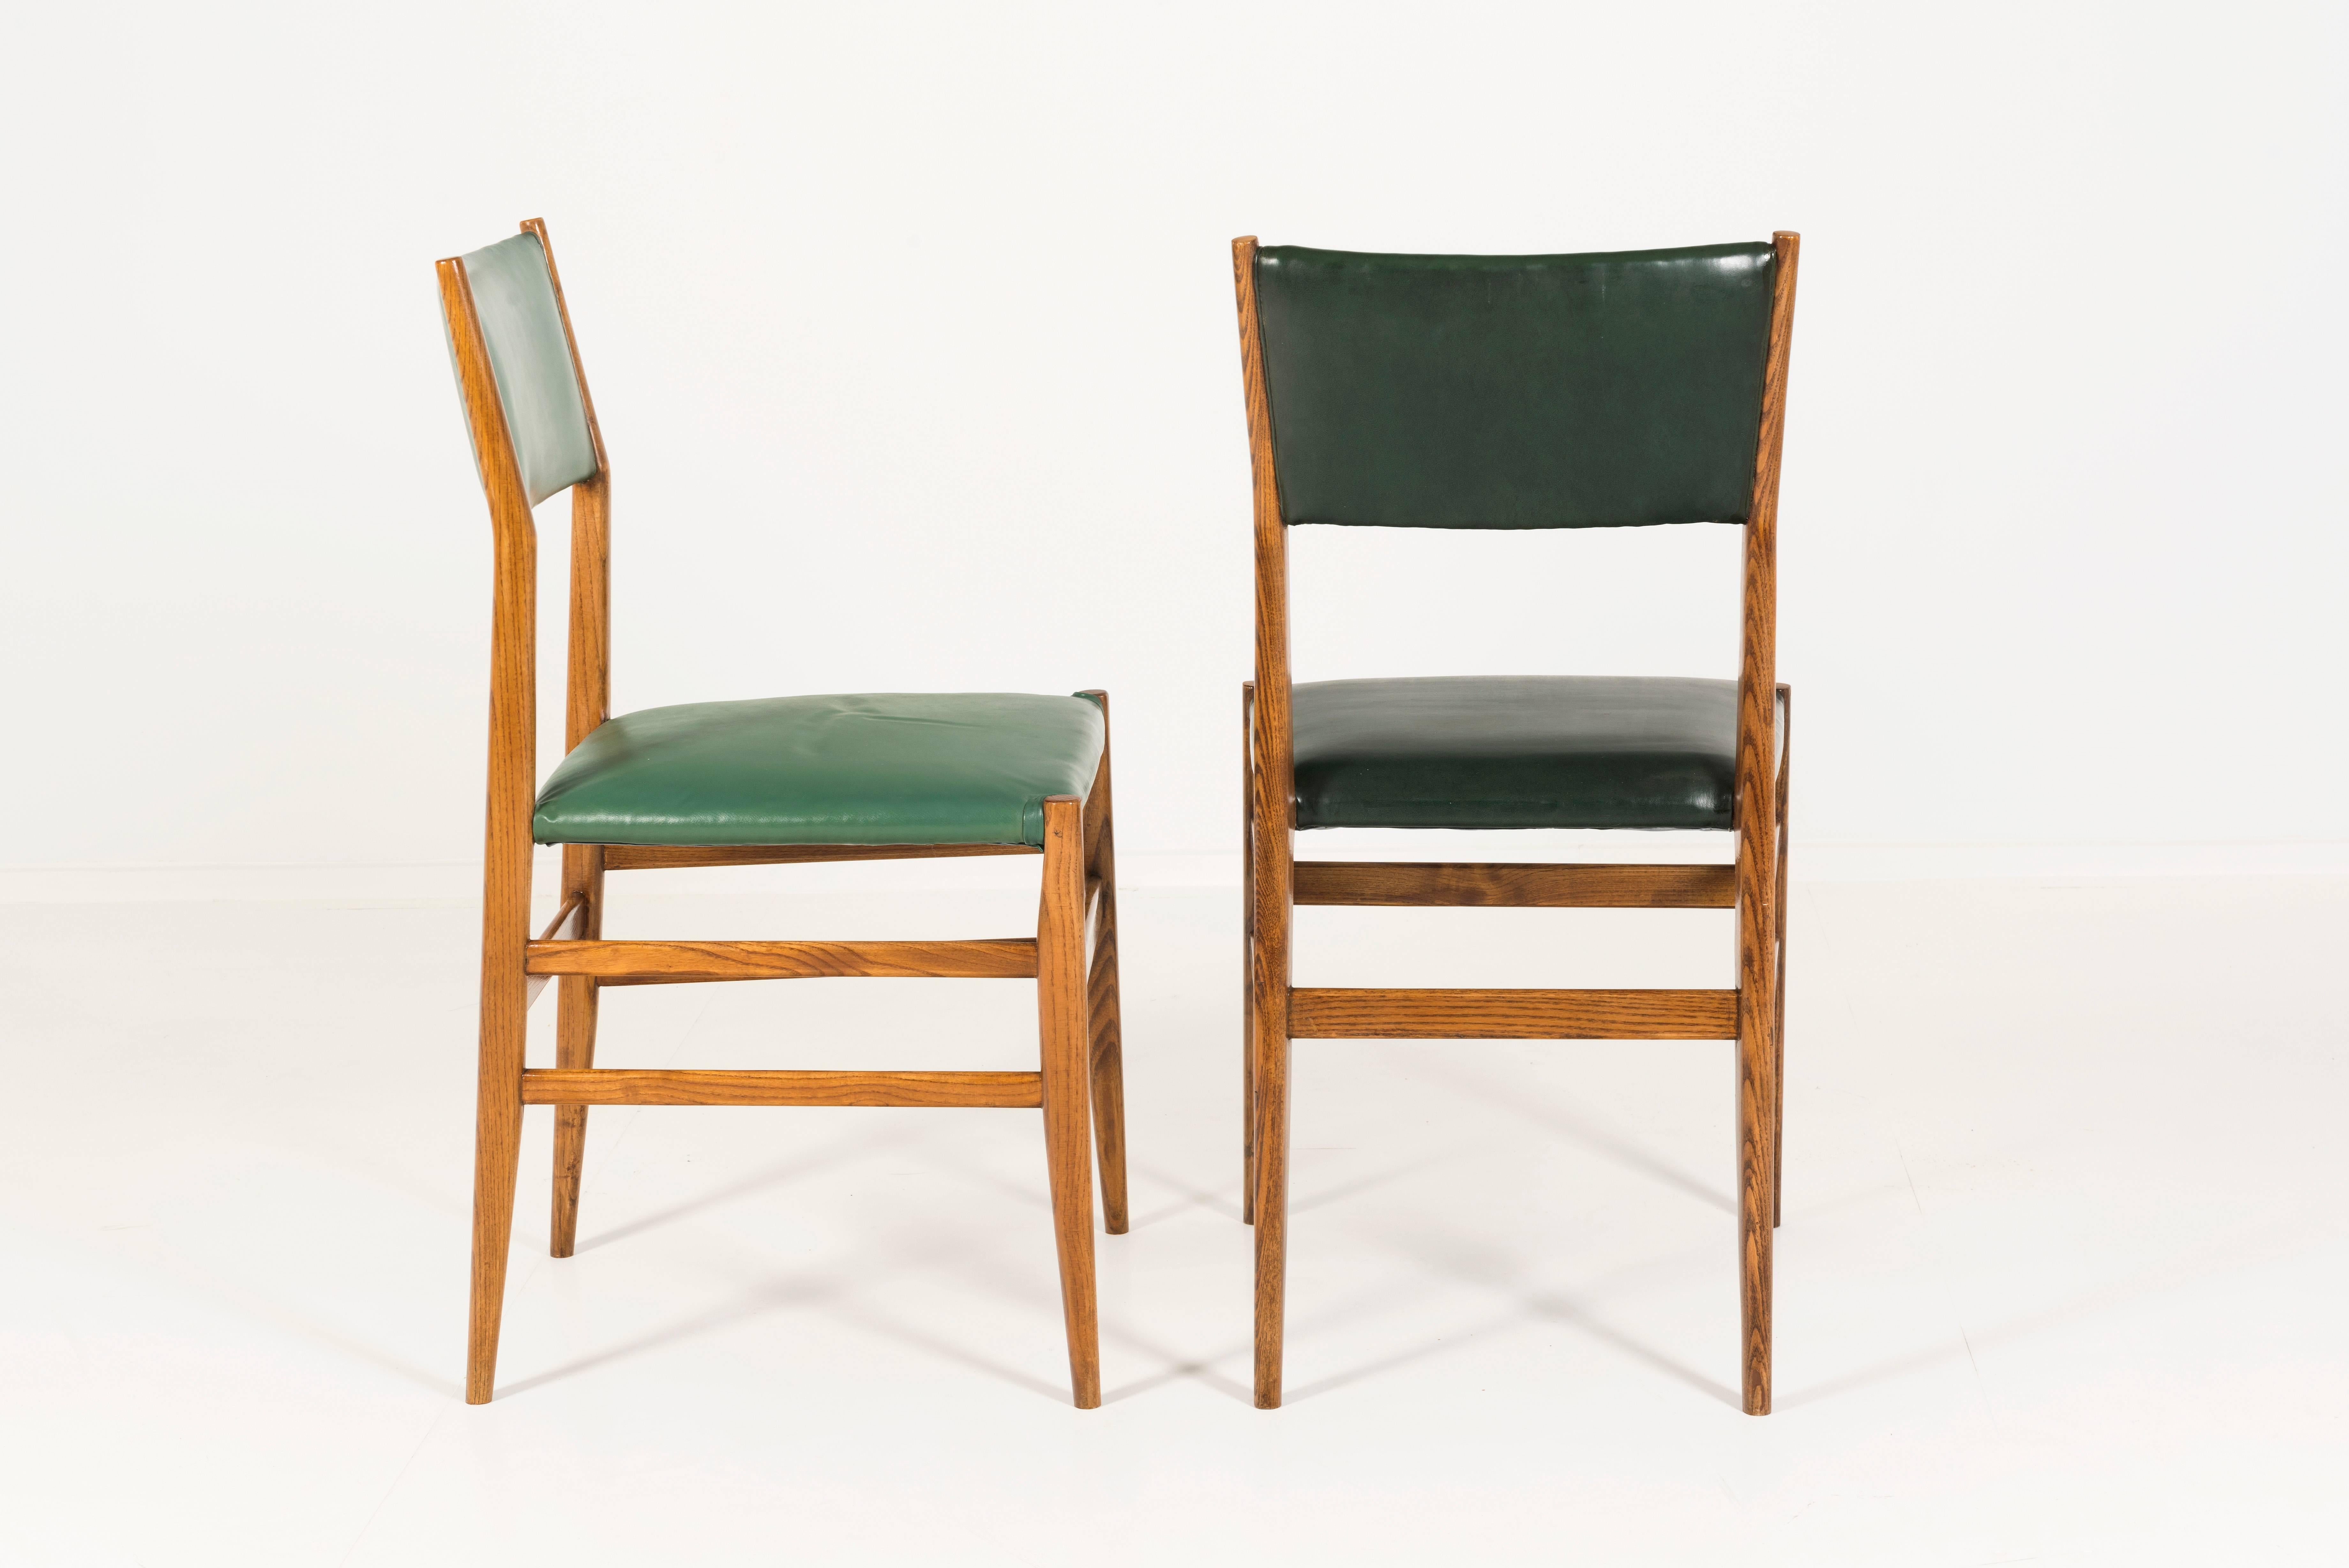 12 vintage dining chairs in polished ash tree wood, original clear and dark green skai upholstery, model 